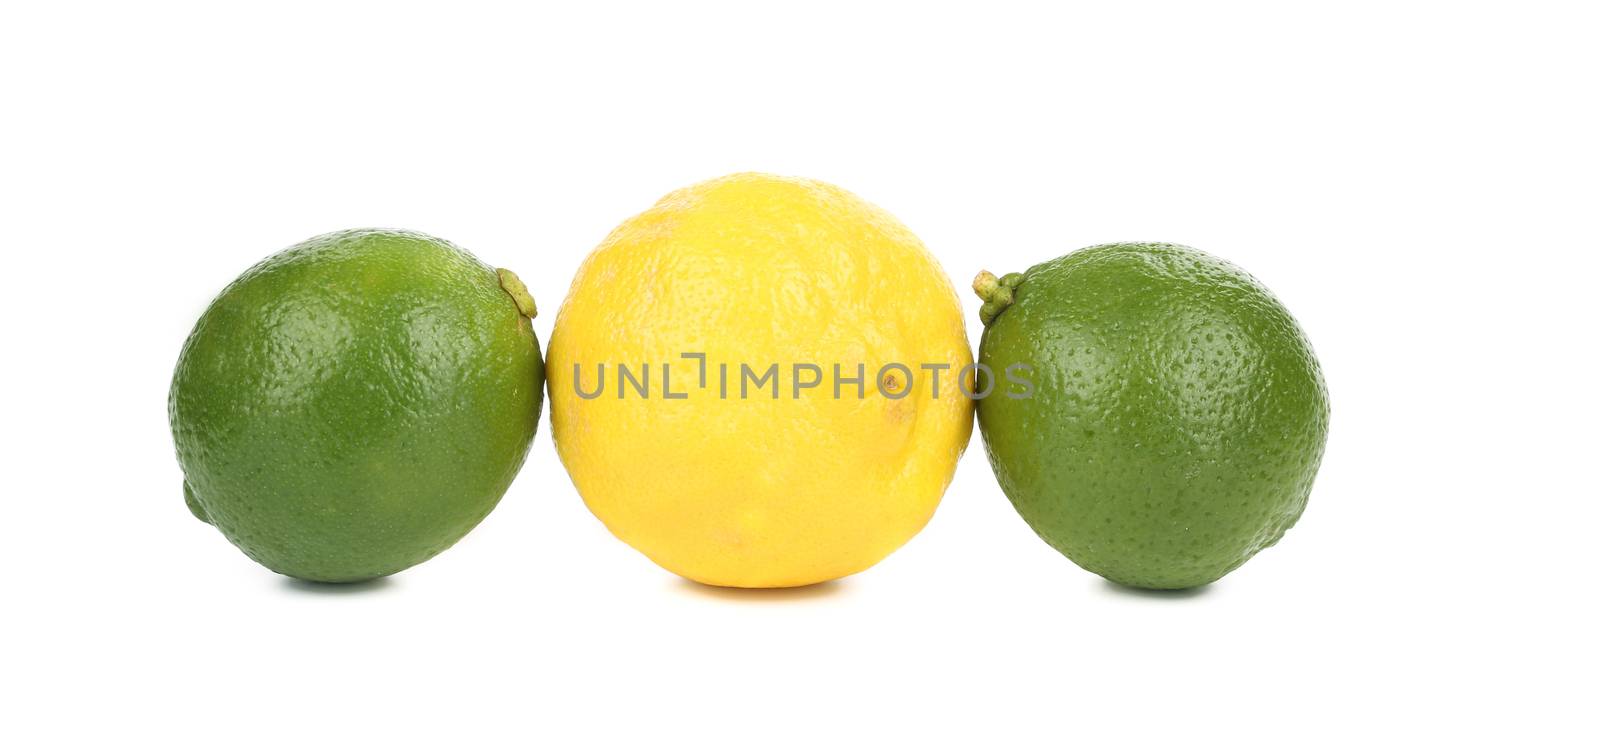 Two lime and one lemon. Isolated on a white background.